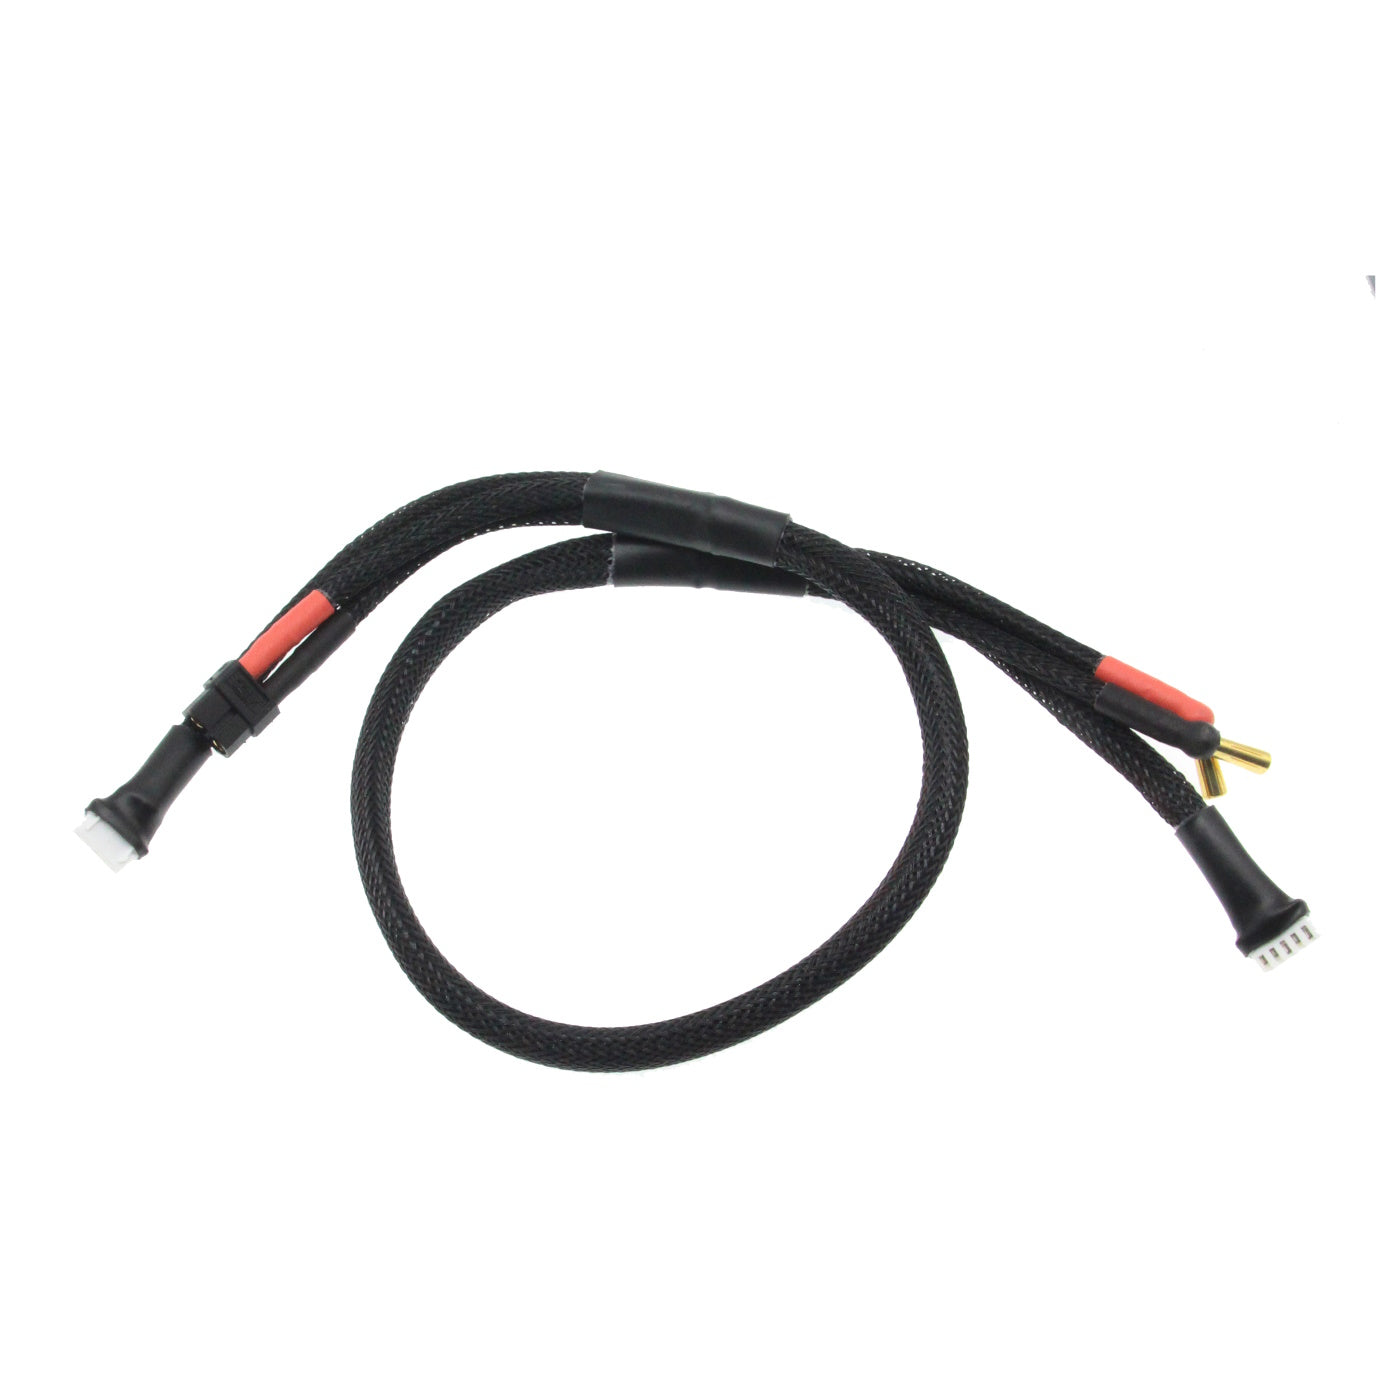 Powerhobby Charging Cable 4S 5mm/xh 5pin battery to XT60/xh 5pin charger.